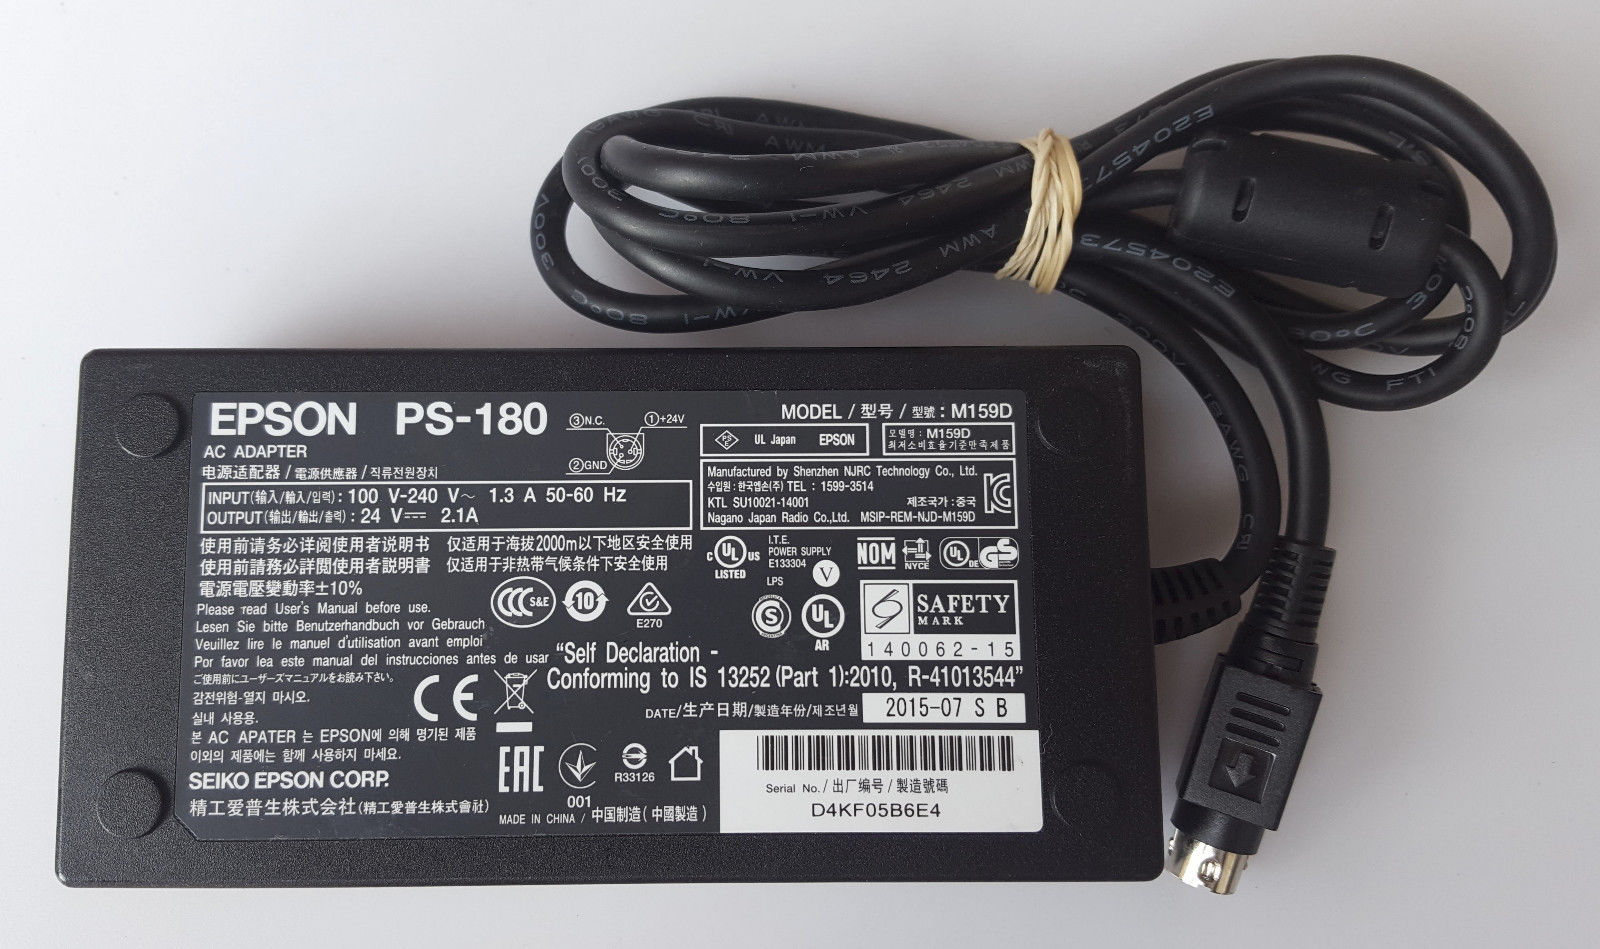 EPSON PS-180 M159D AC/DC POWER SUPPLY ADAPTER 24V 2.1A 3 PIN DIN